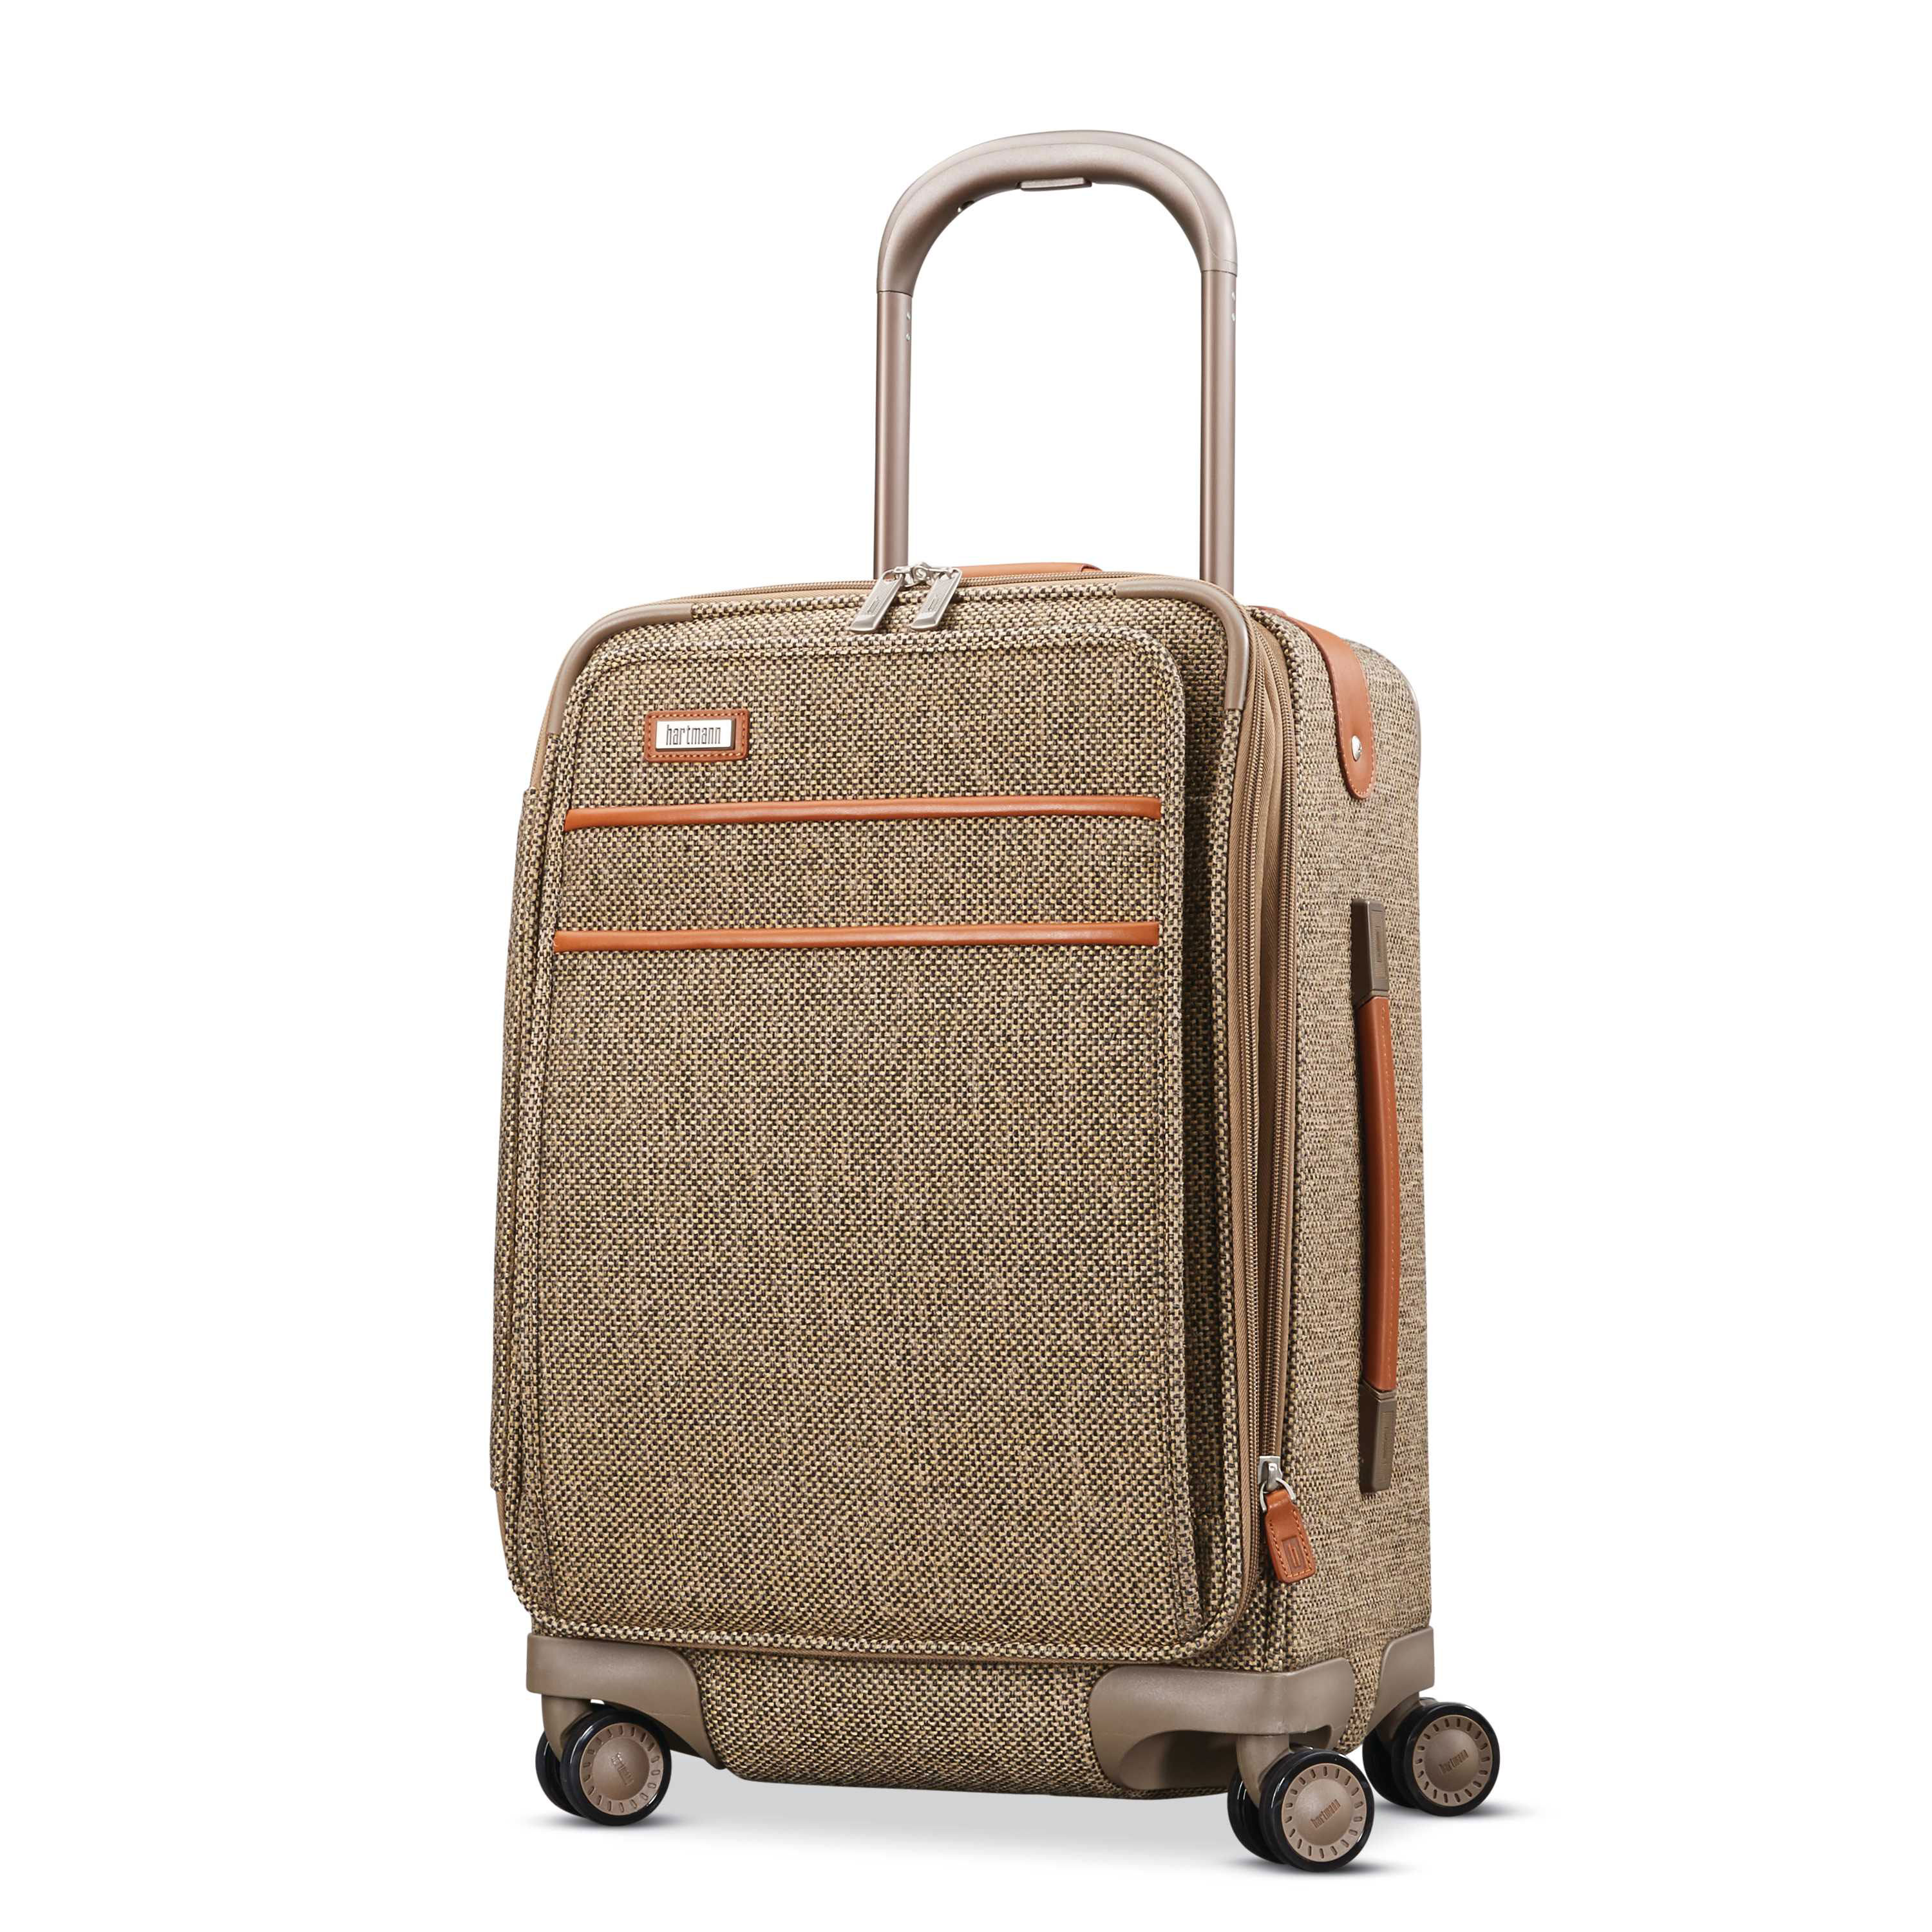 Luxury Carry On Travel Luggage & Bags - Hartmann